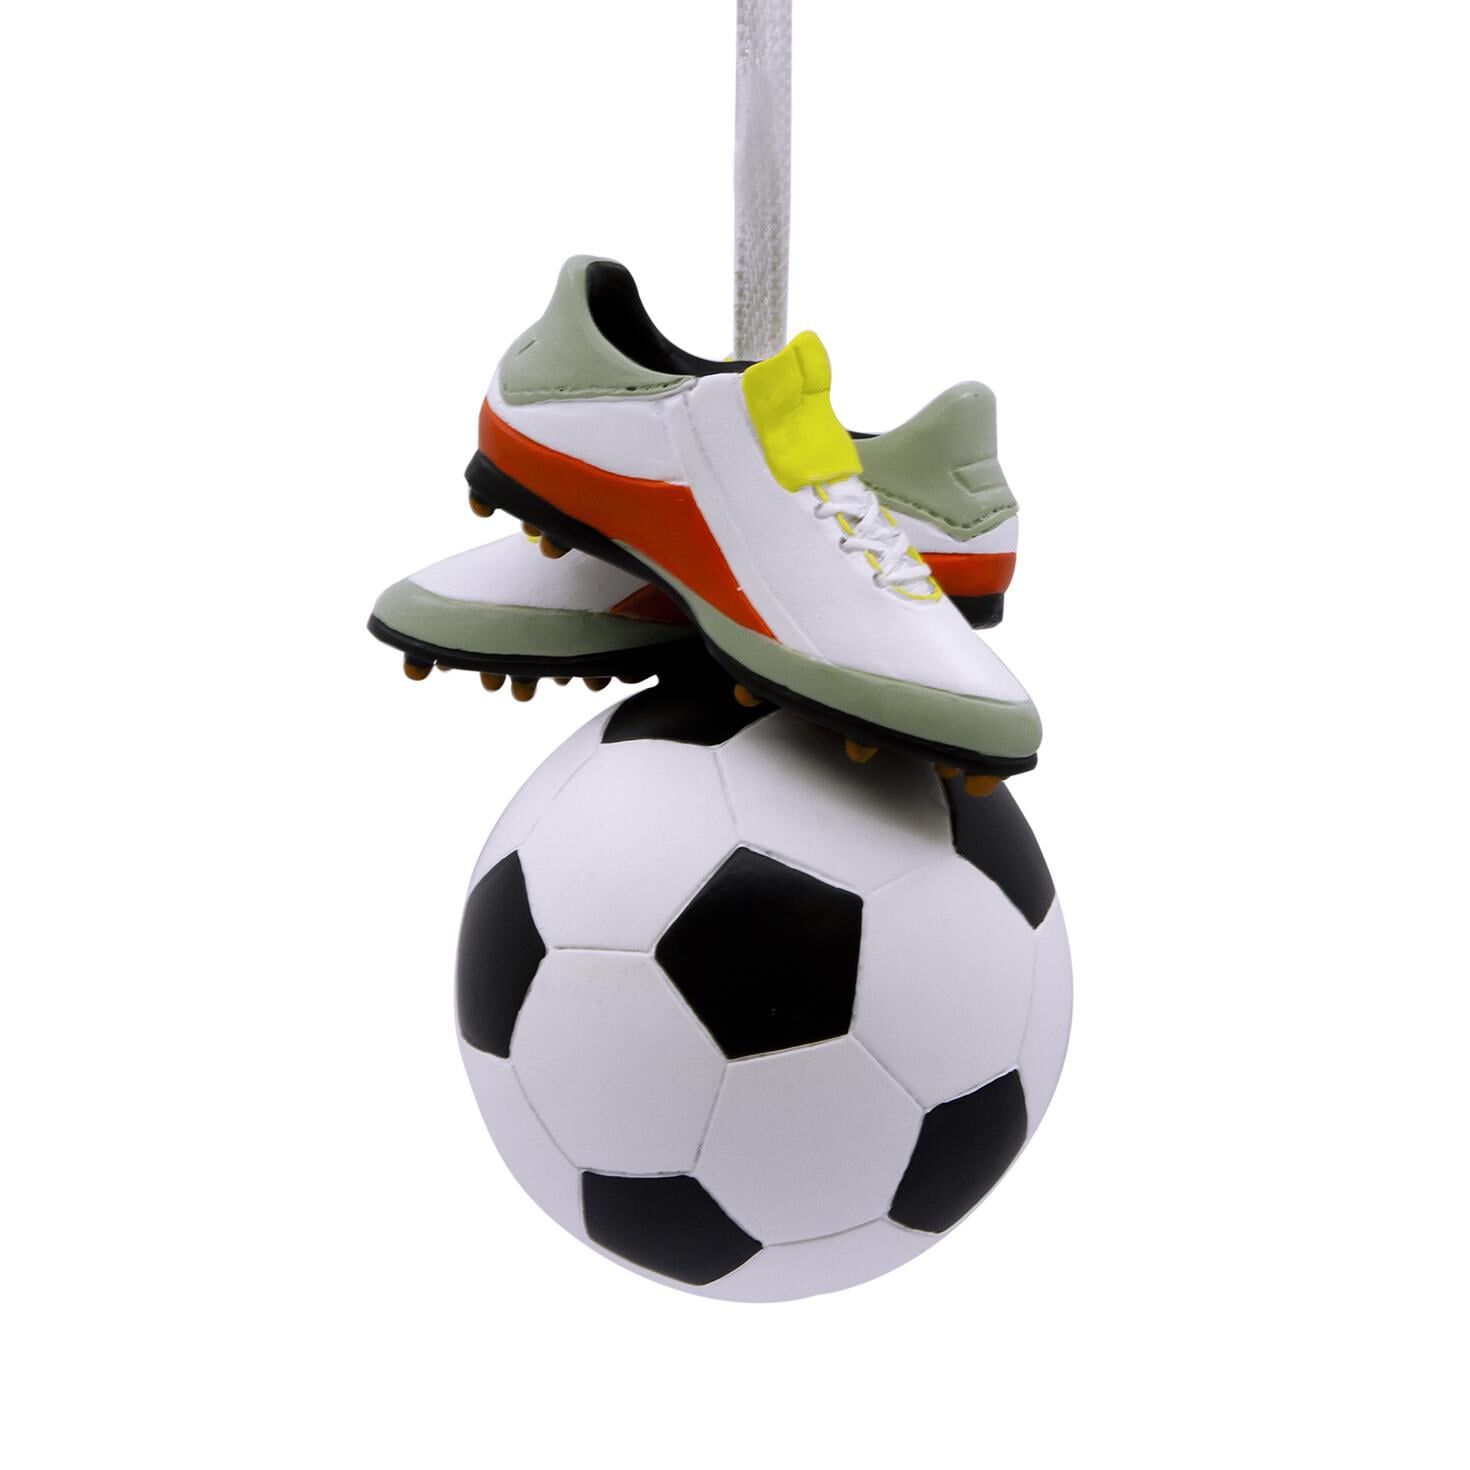 soccer ball and cleats